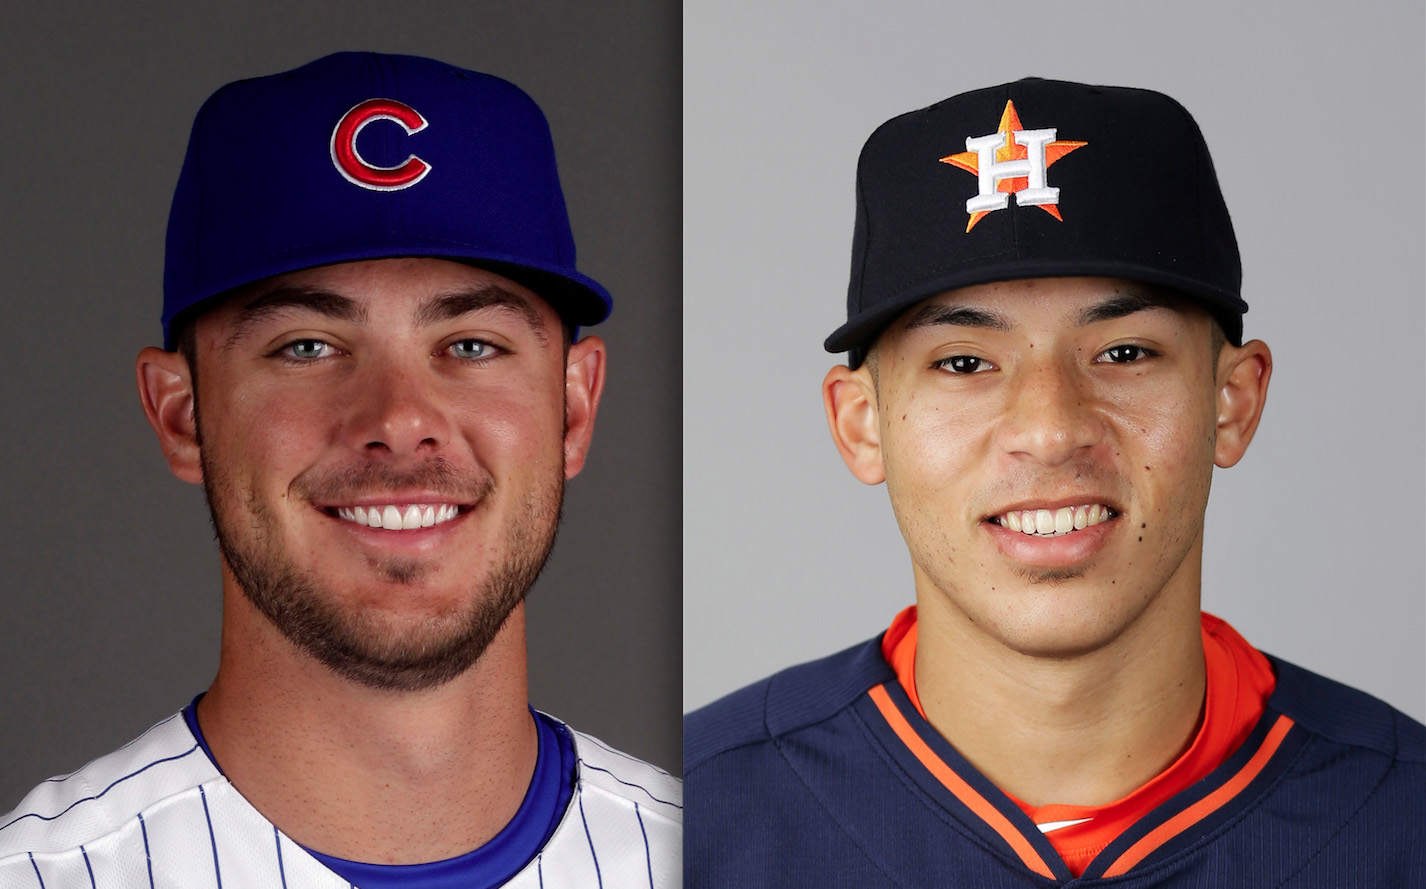 Cubs' Bryant, Astros' Correa voted top MLB rookies - The Columbian